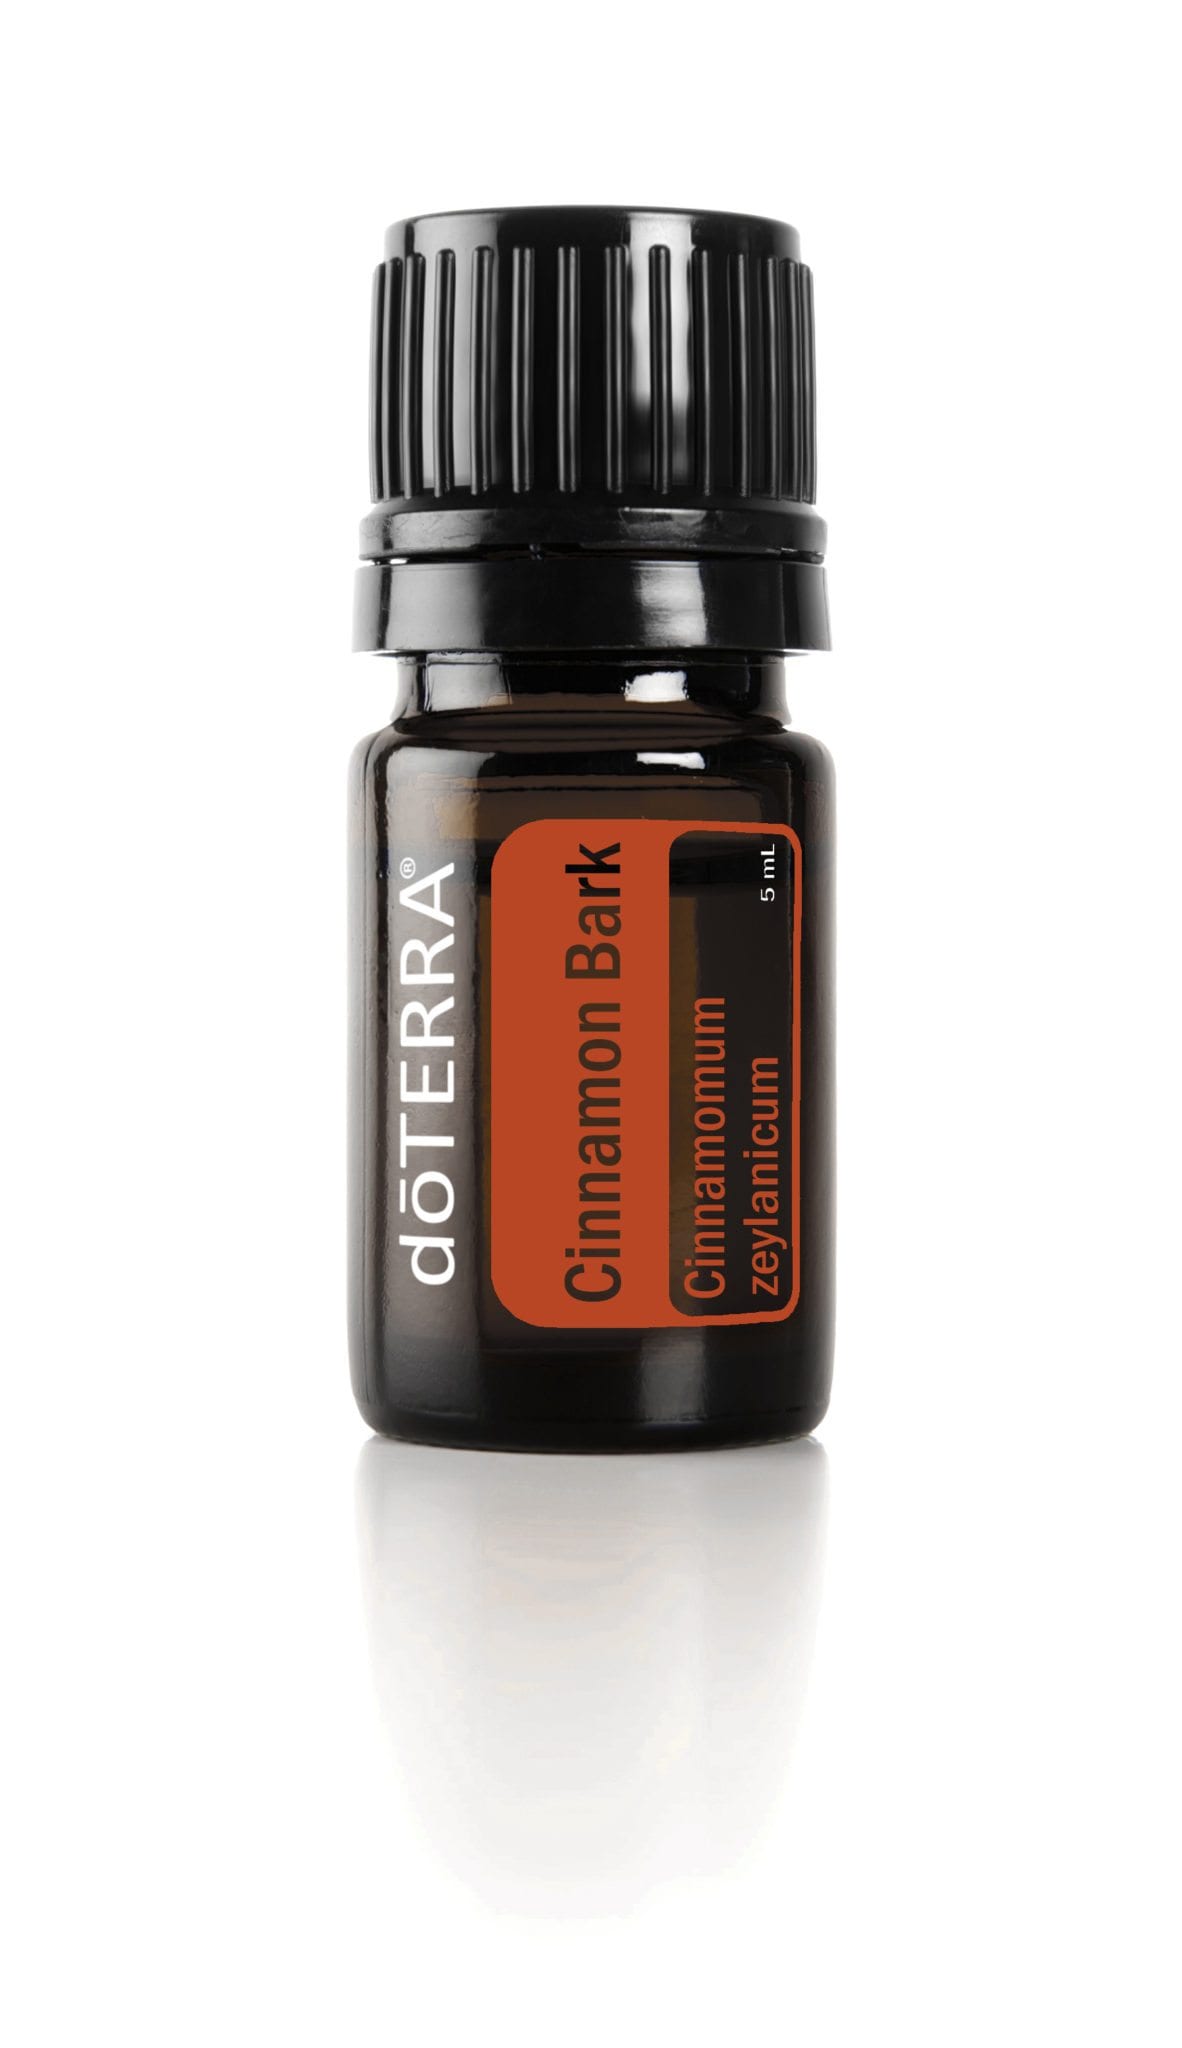 Cinnamon supports the reproduction system and can heal sexual issues. Contact us to find out more!